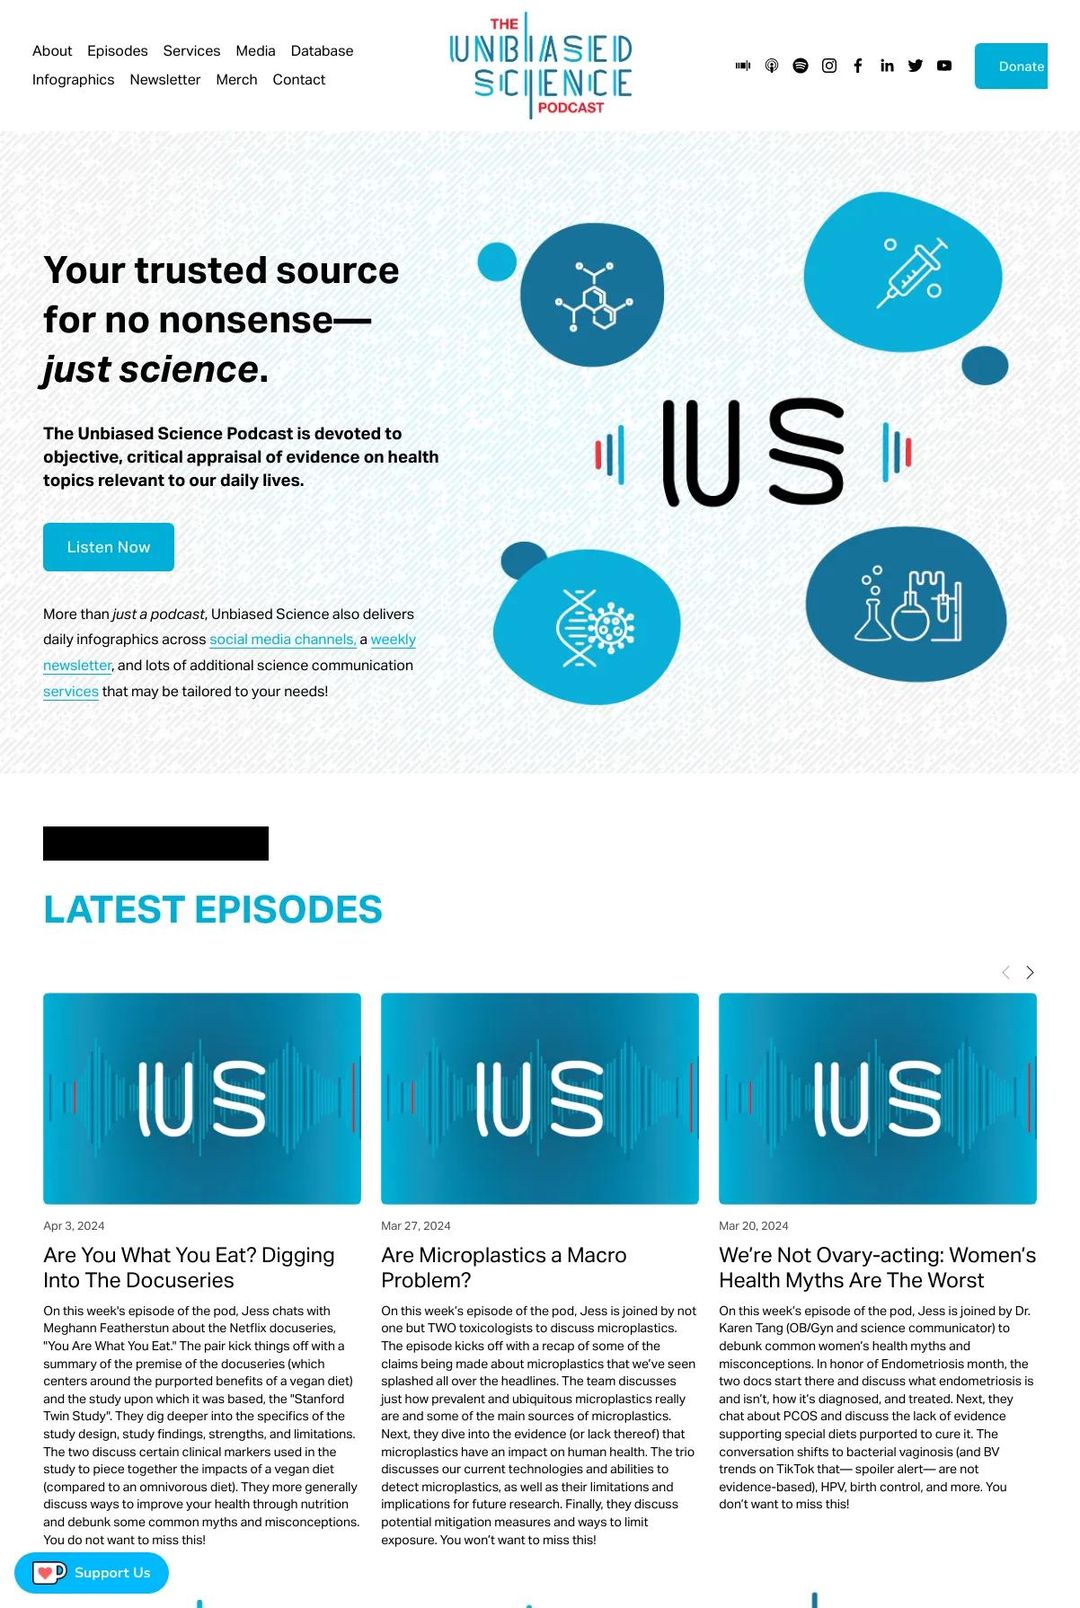 Screenshot 1 of Unbiased Science Podcast (Example Squarespace Podcast Website)